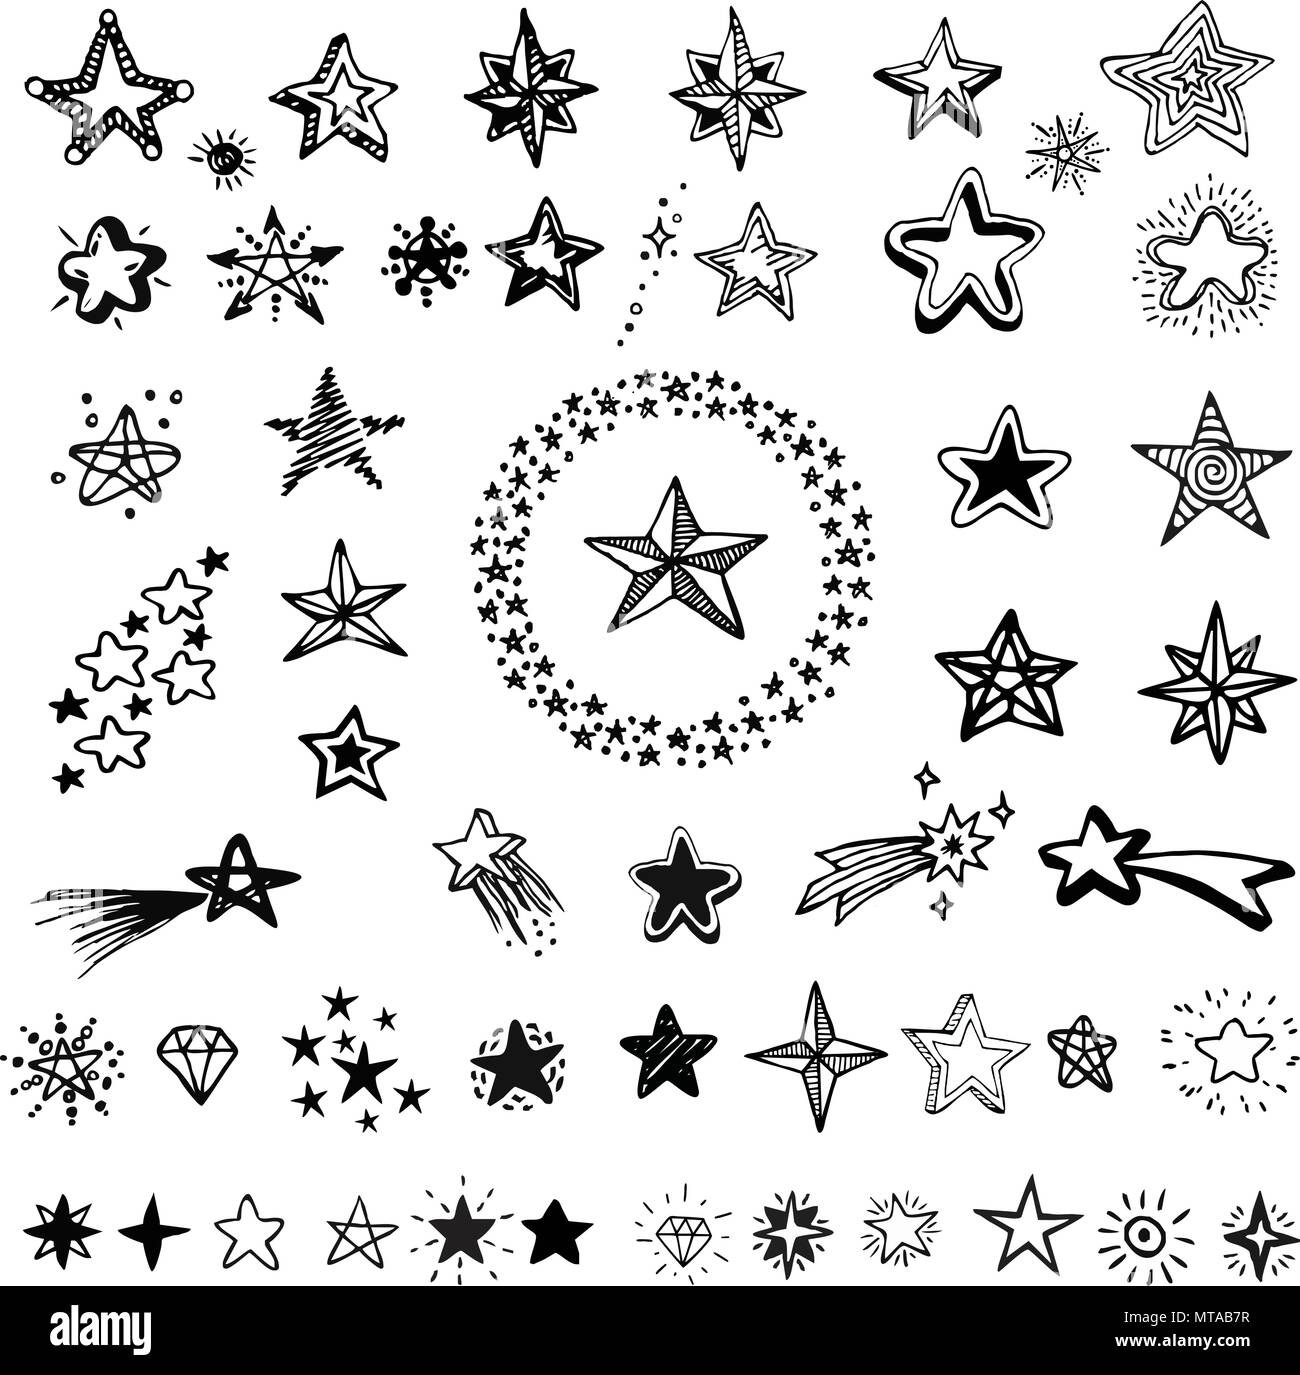 Star icons and pictogram. Collection black star shapes Isolated on a ...